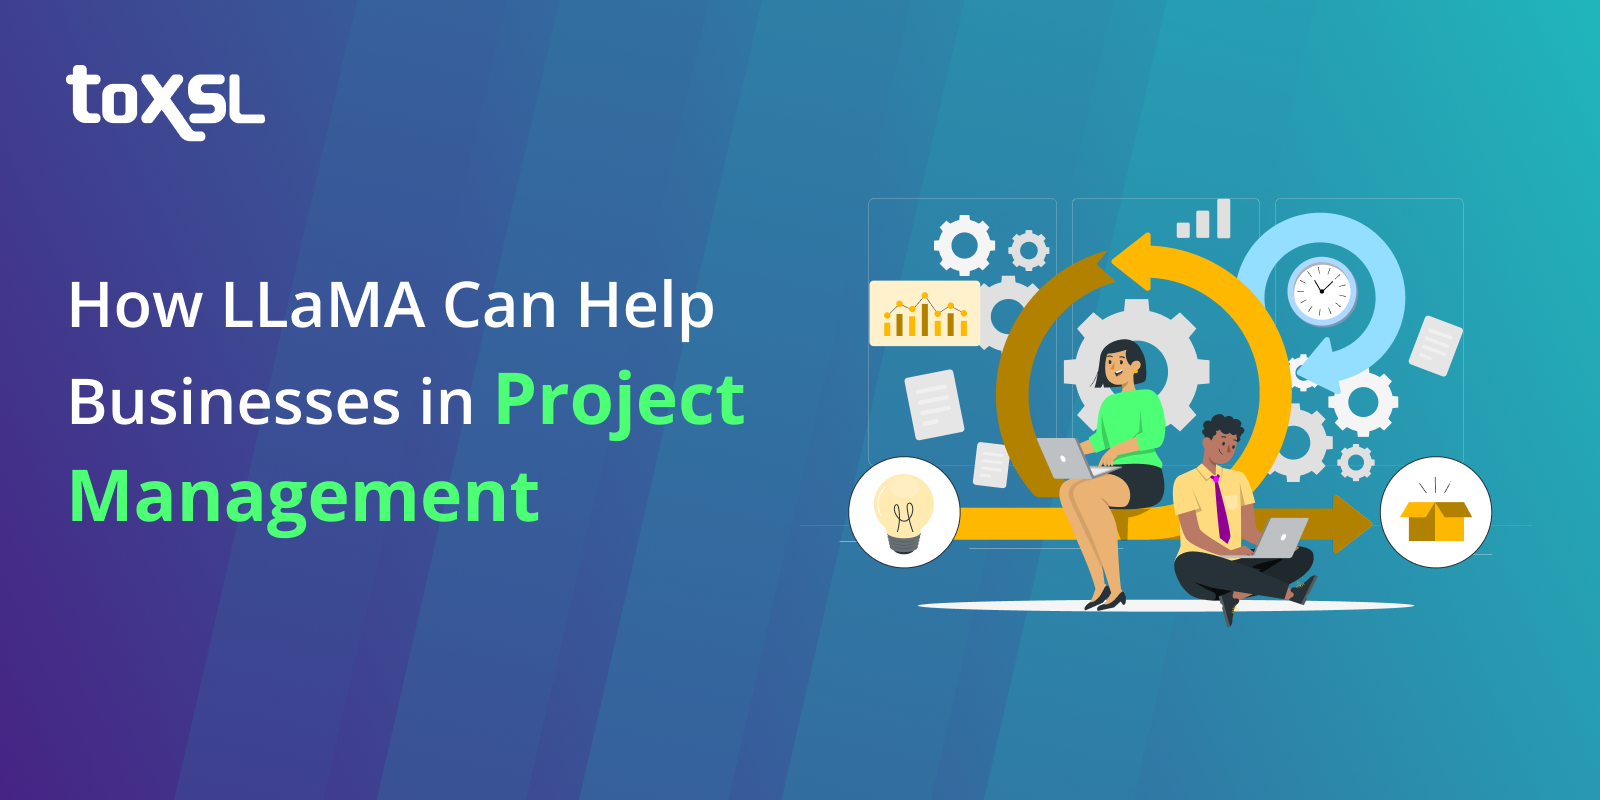 How LLaMA Can Help Businesses in Project Management